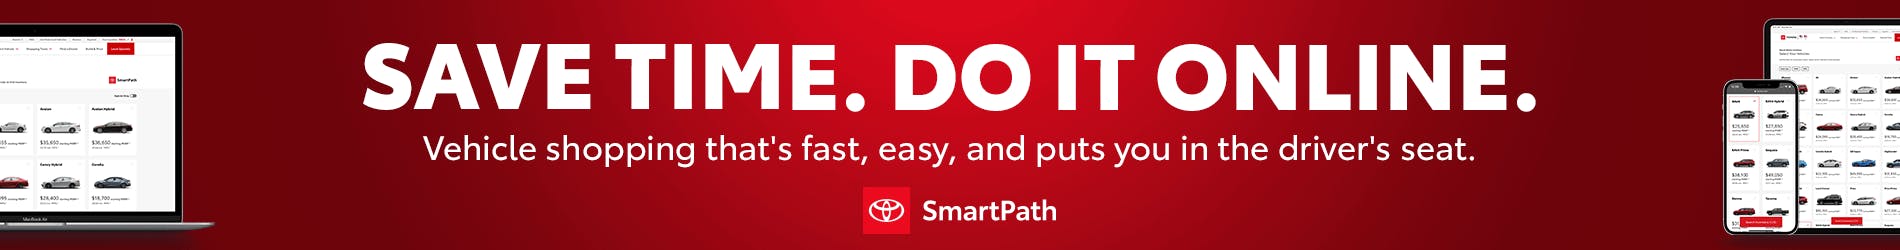 ! SmartPath Banners